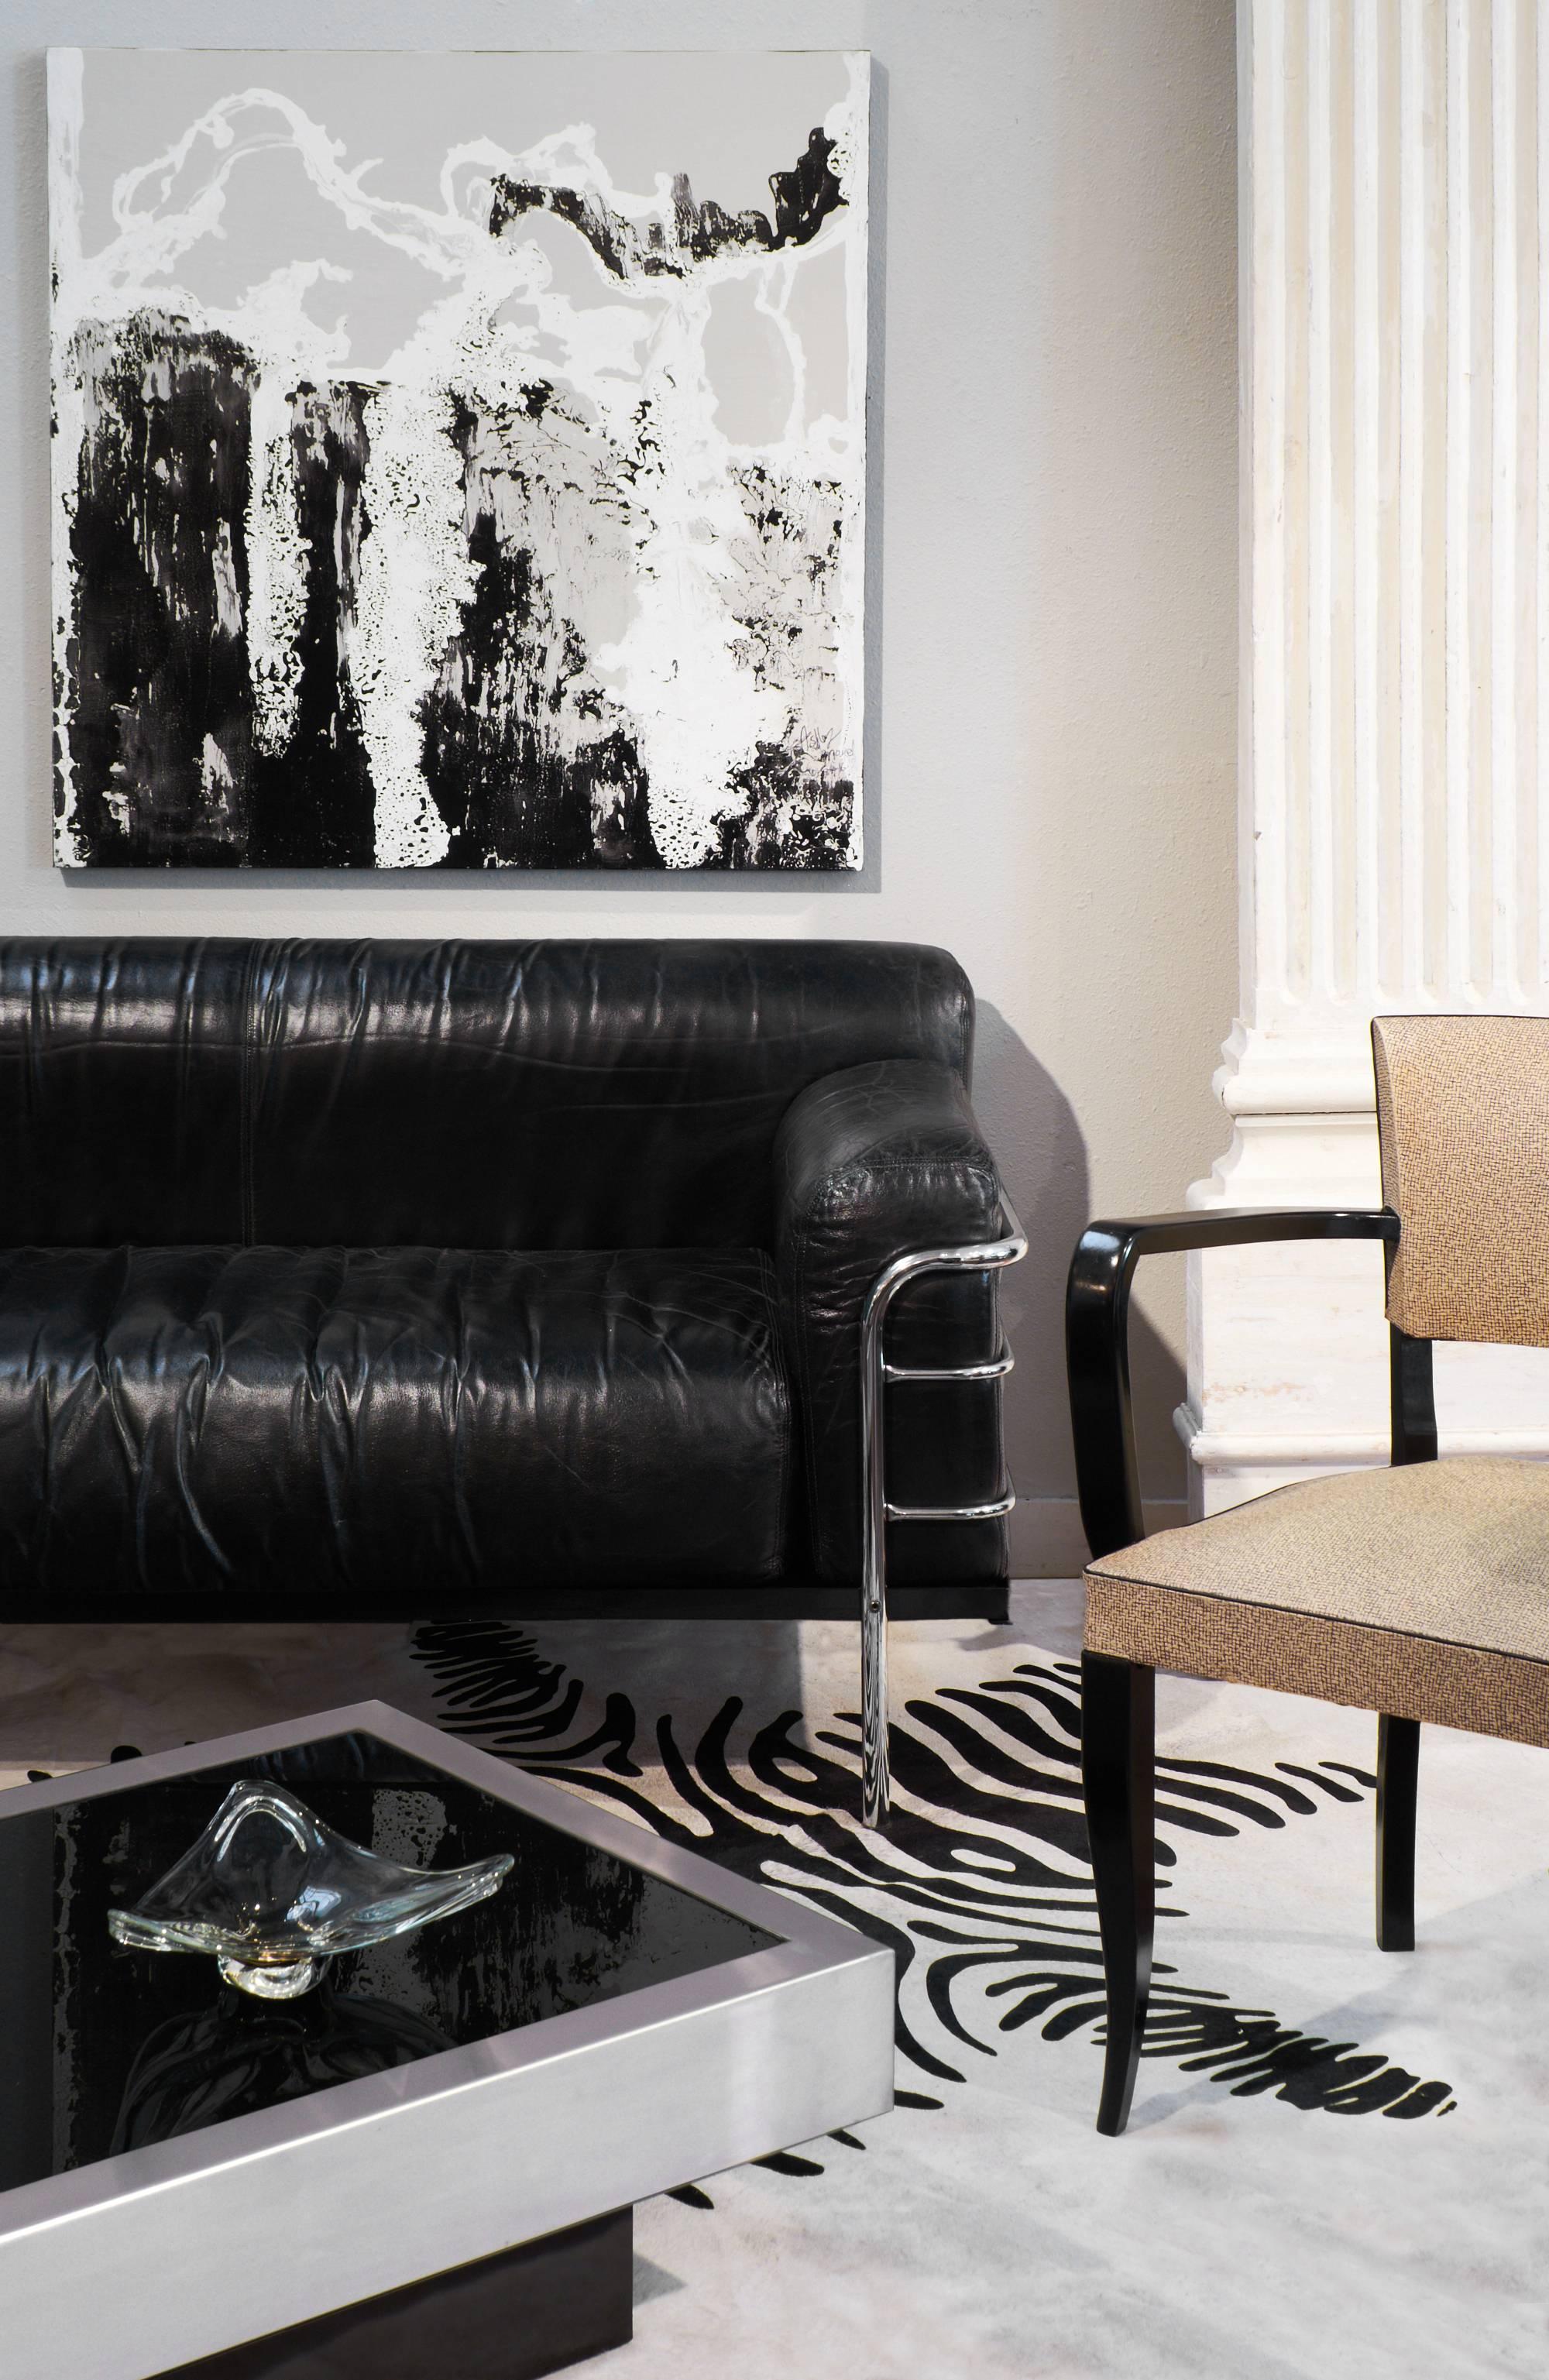 Vintage Bauhaus style sofa in black leather and chrome, in the style of Le Corbusier's LC2 sofa and armchairs.